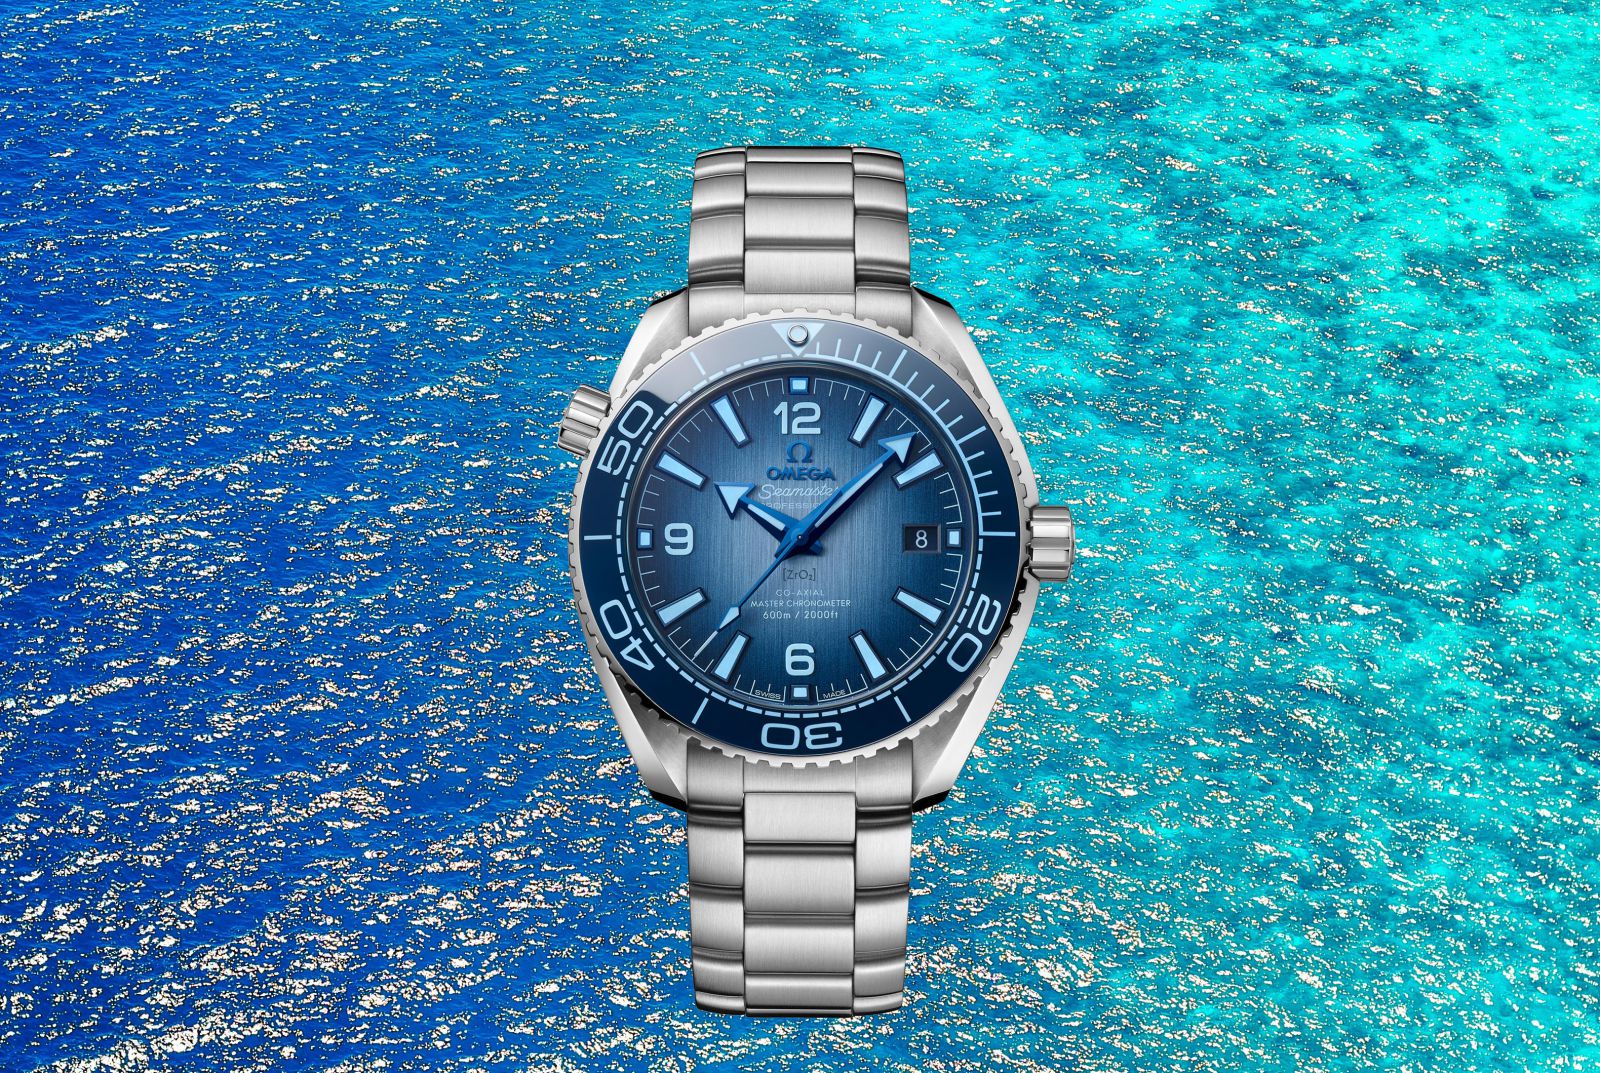 Planet Ocean 600M Co-Axial Master Chronometer 215.30.40.20.03.002